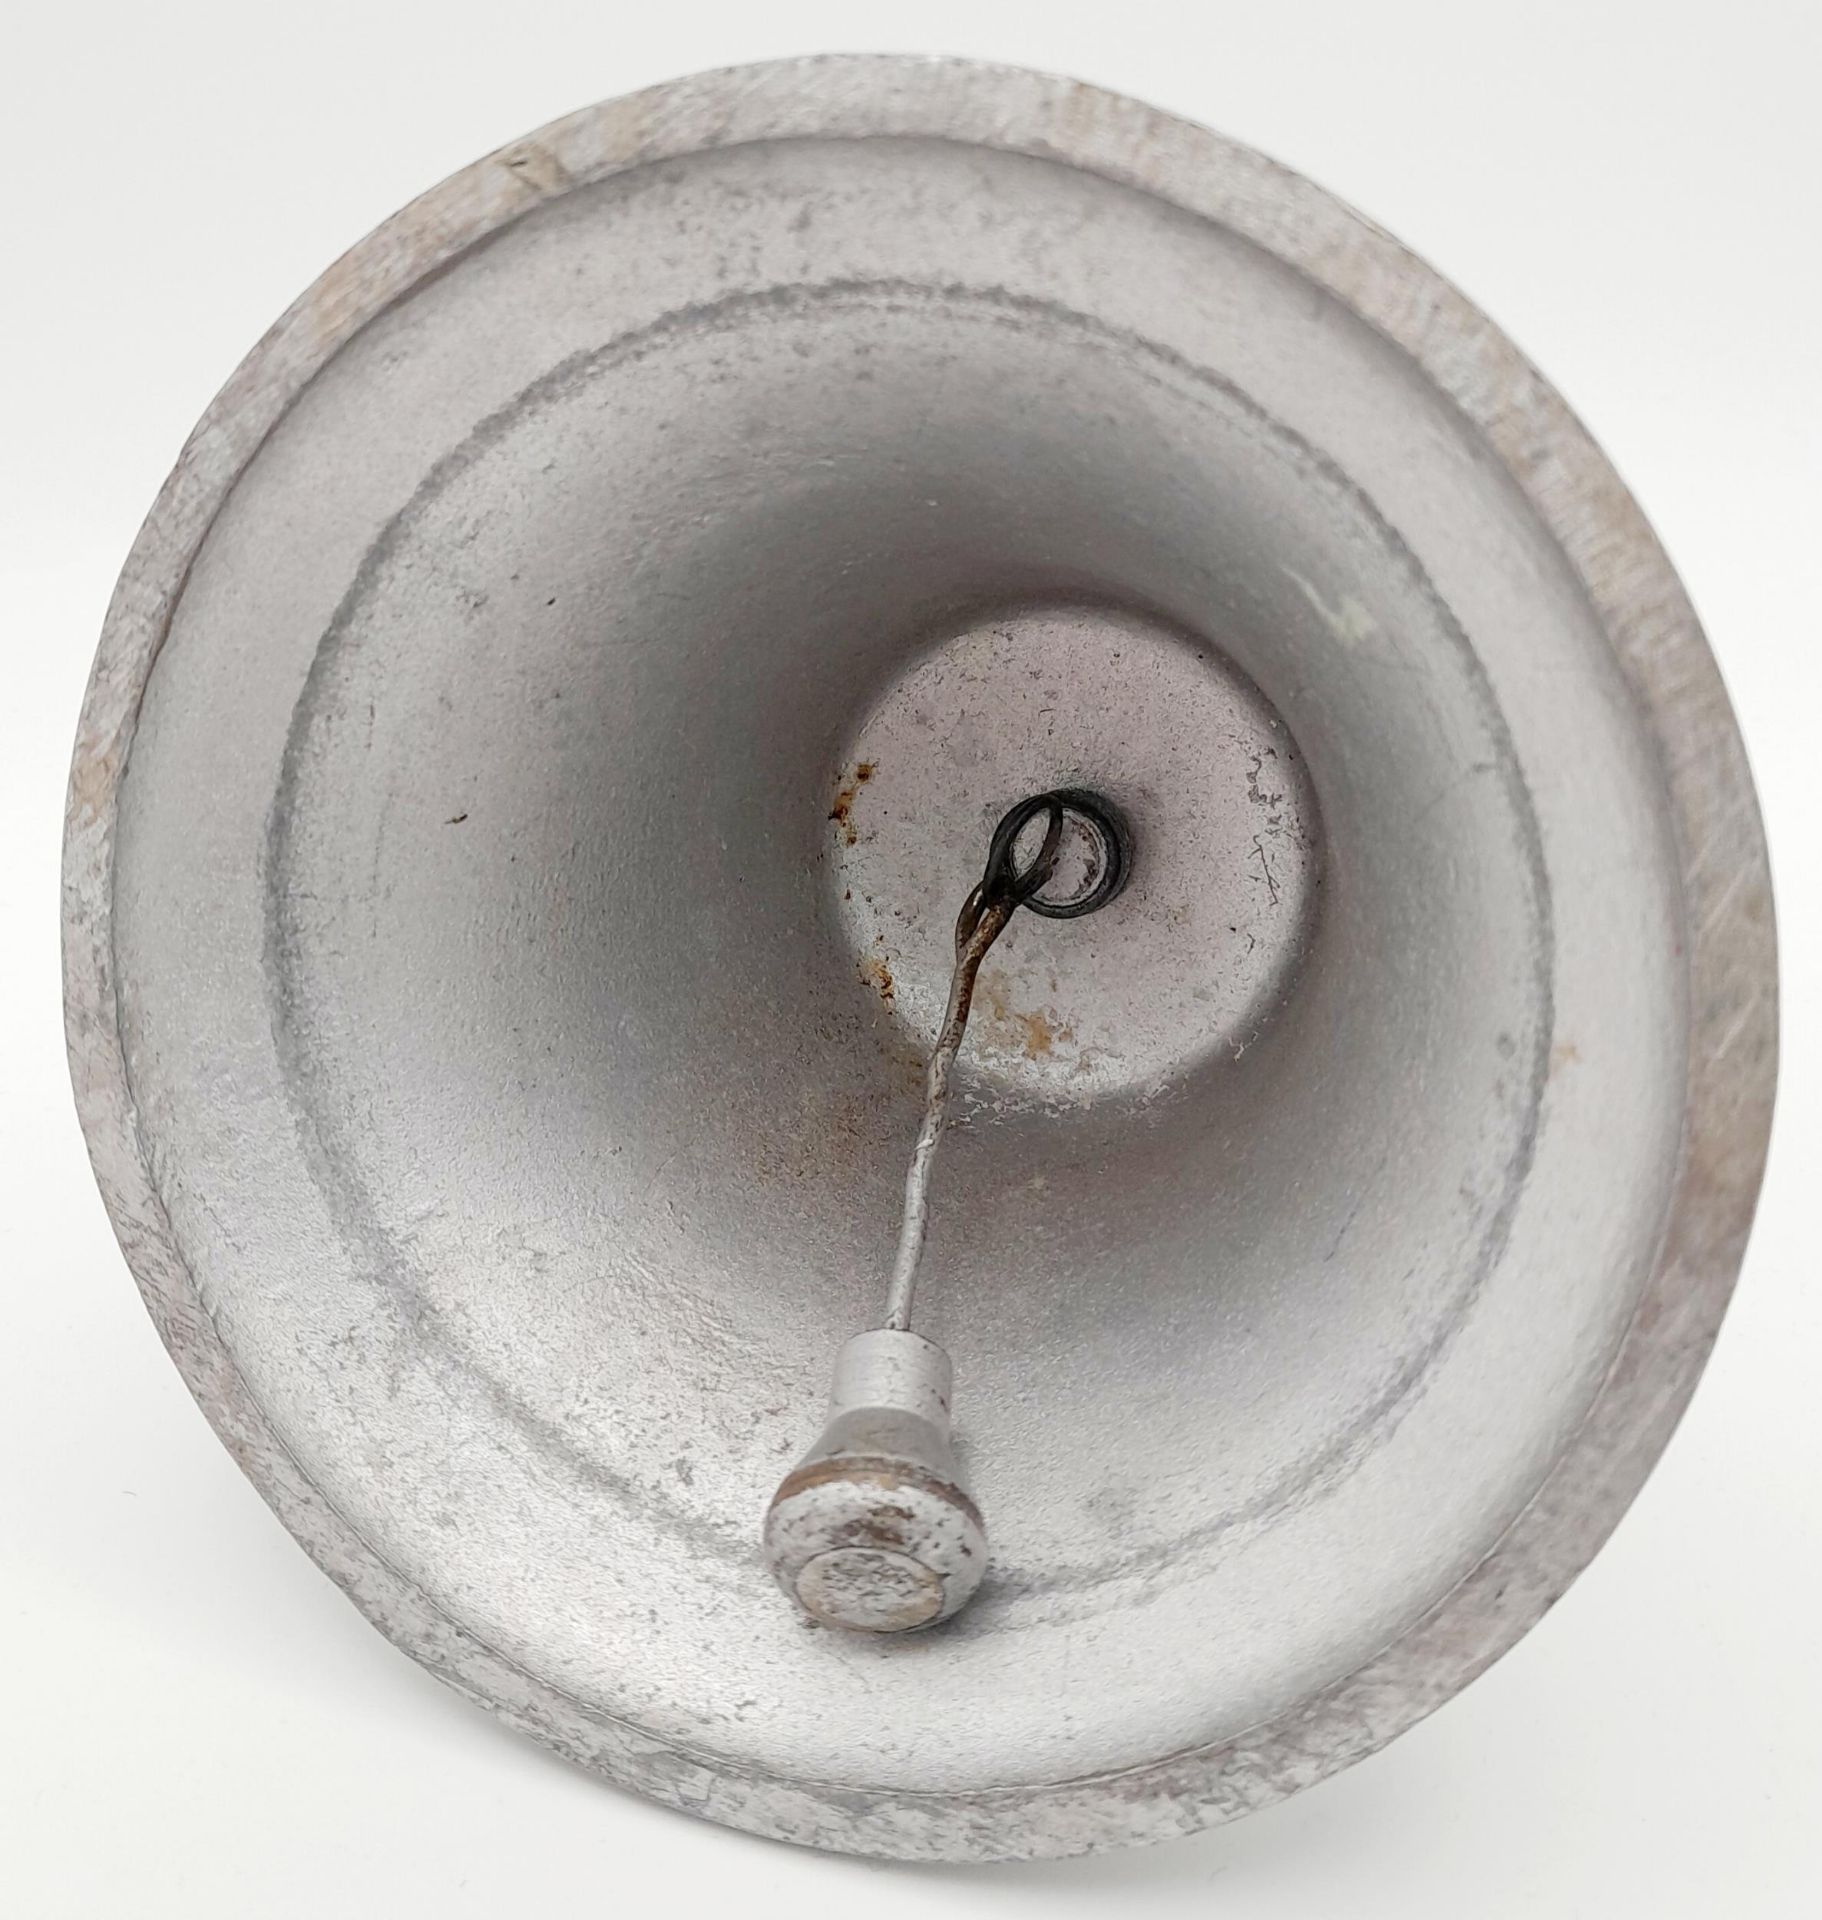 RAF Benevolent Fund Bell Made From German Aircraft Shot Down Over Britain 1939 - 1945. Funds - Image 3 of 5